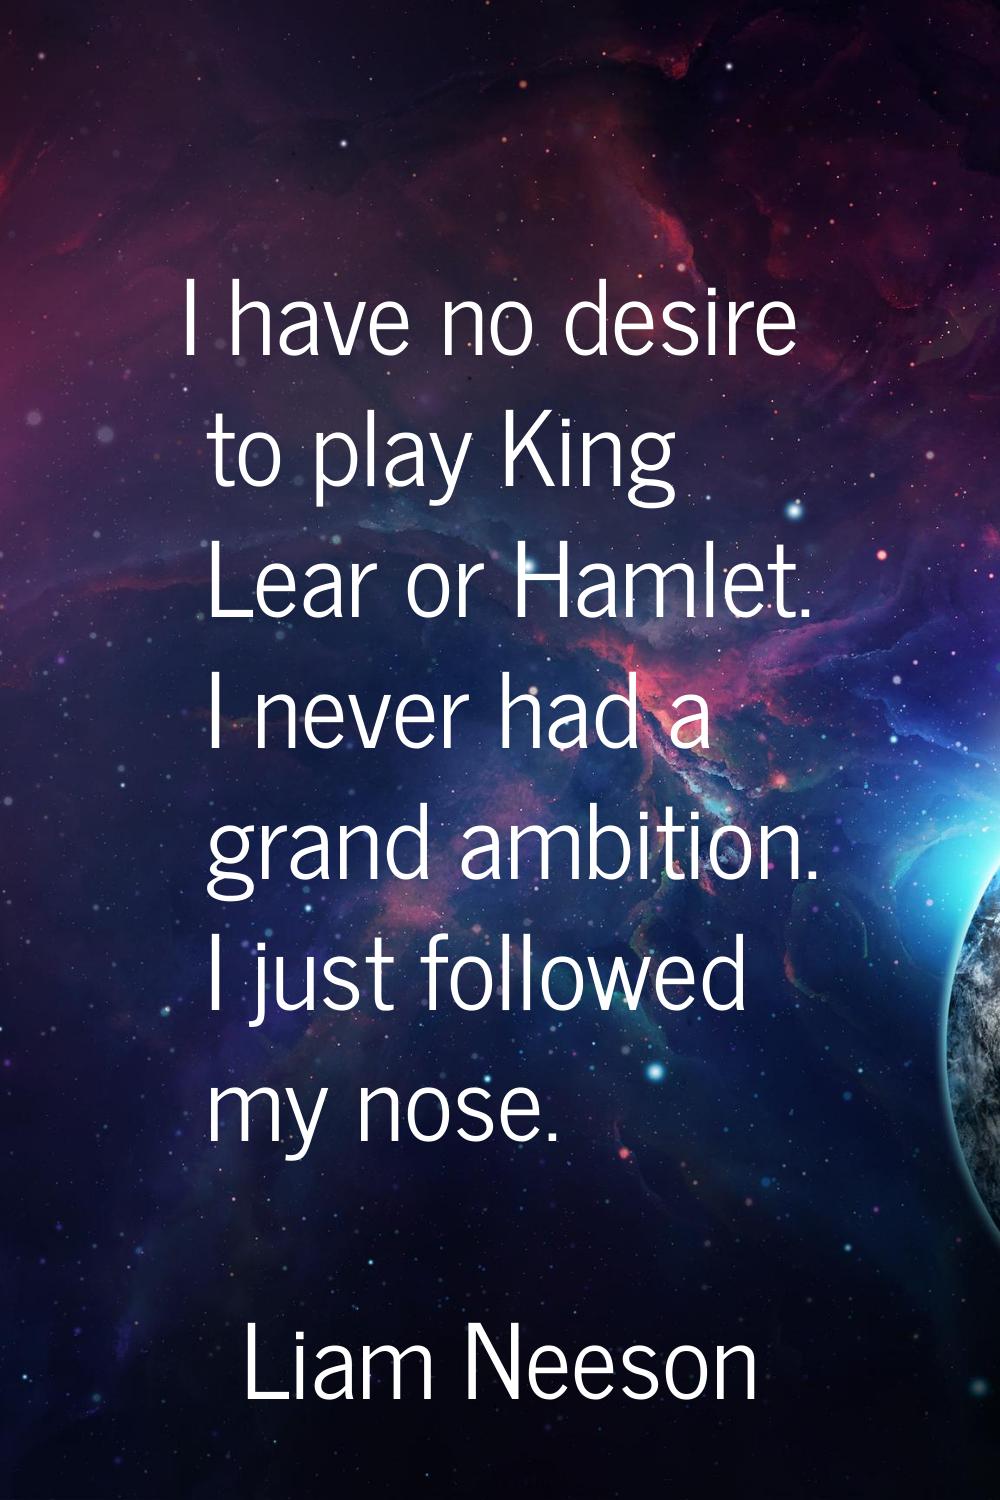 I have no desire to play King Lear or Hamlet. I never had a grand ambition. I just followed my nose